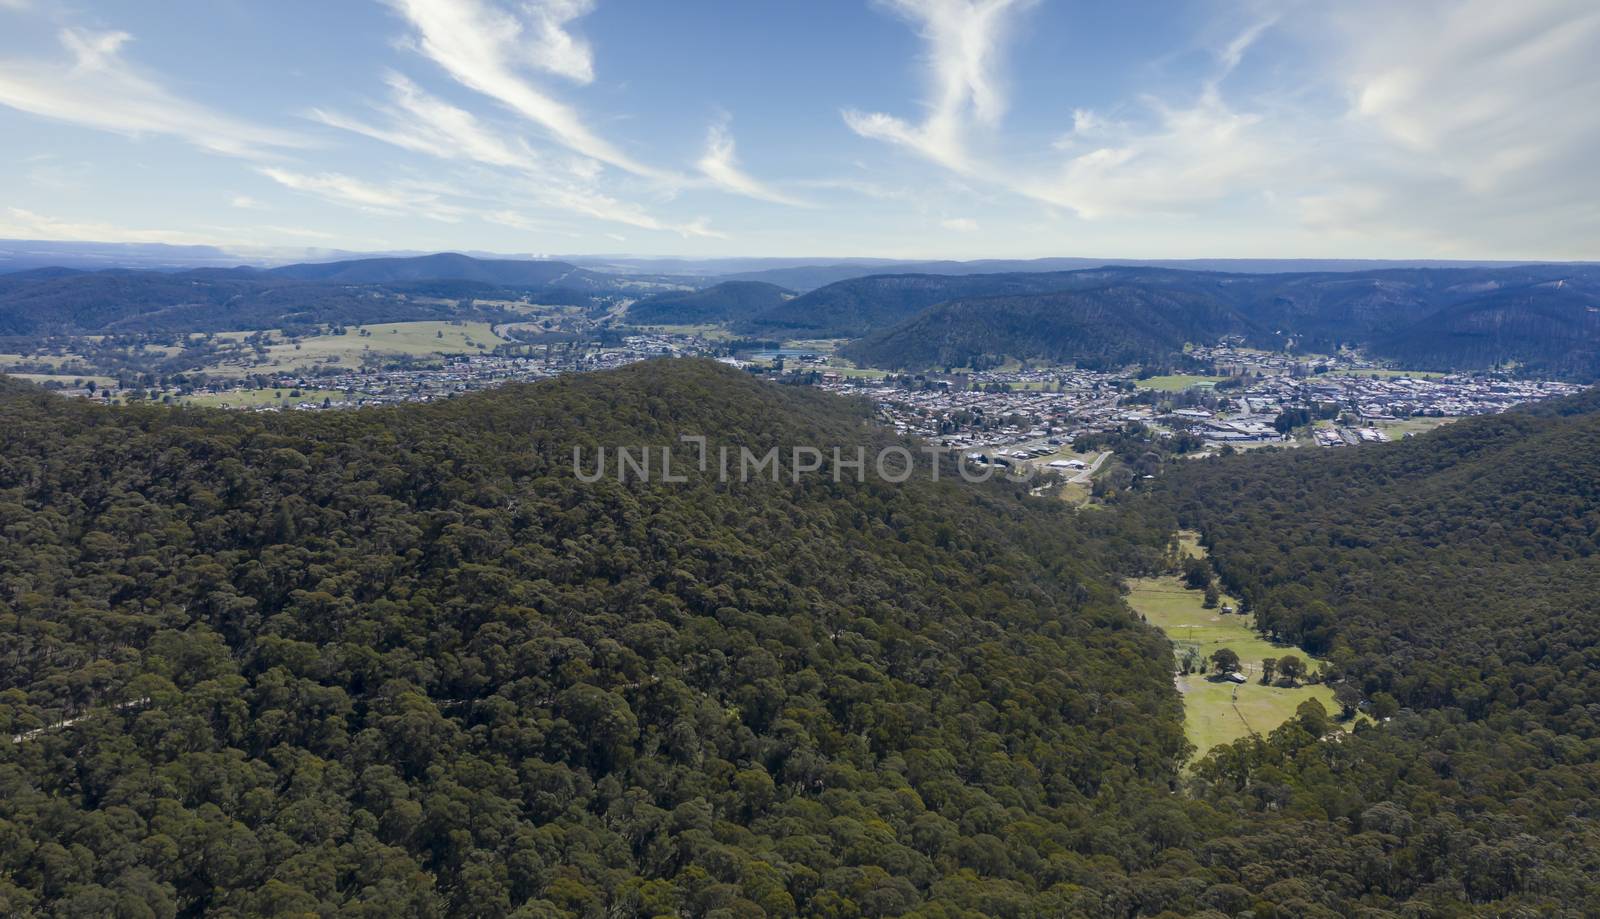 The township of Lithgow in regional Australia by WittkePhotos